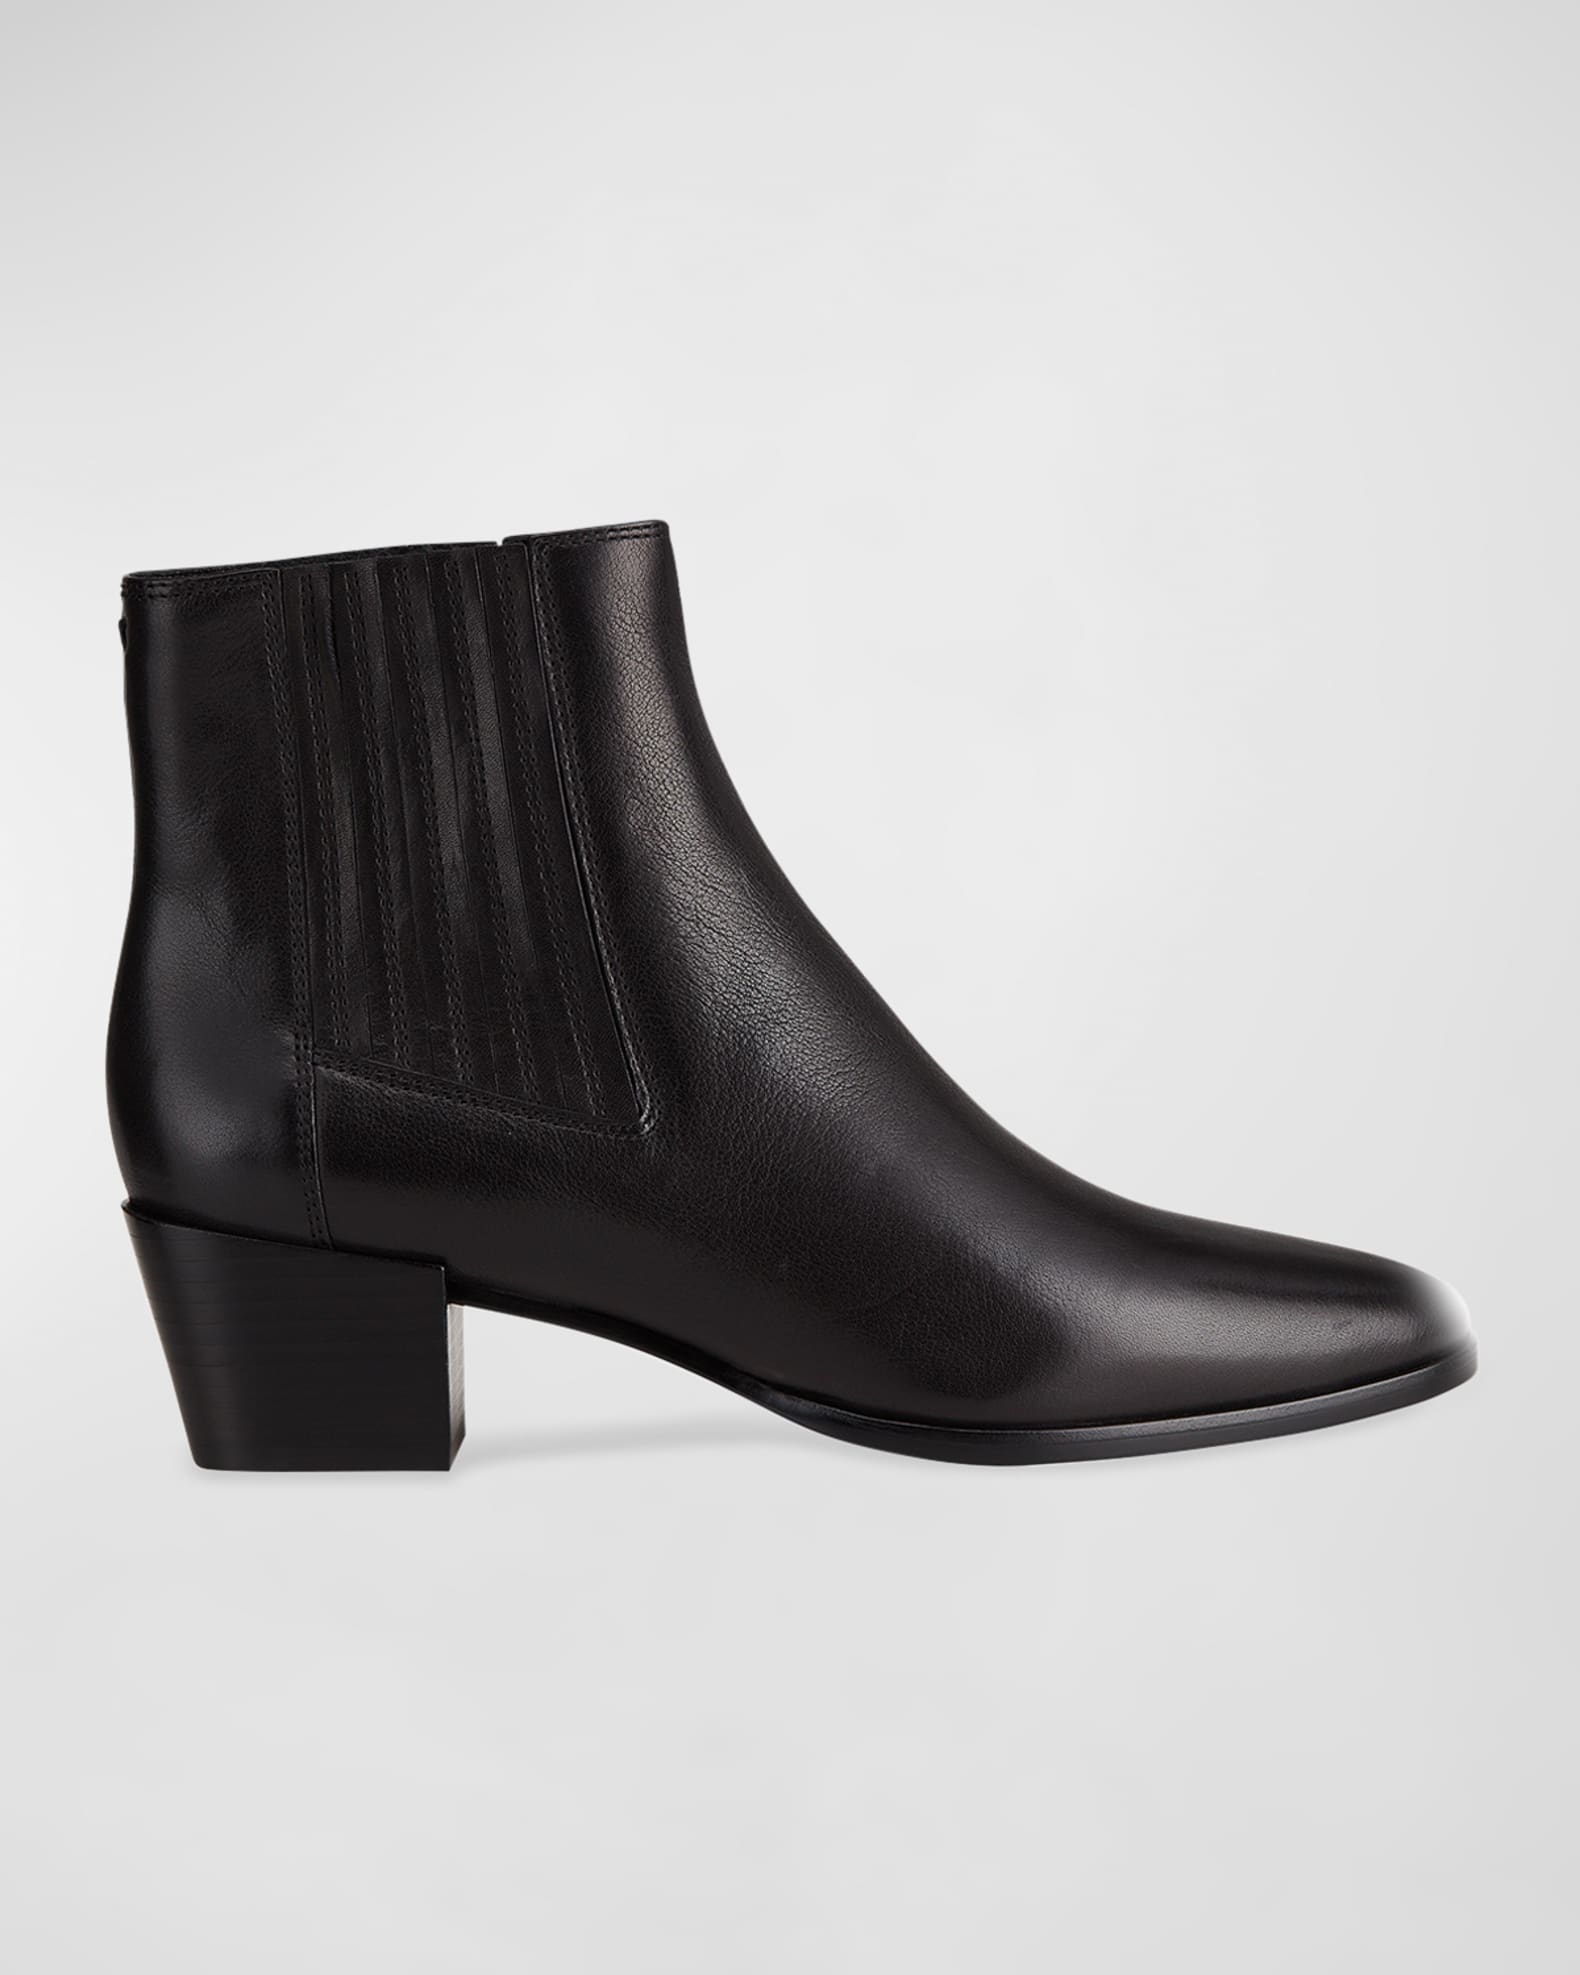 Rag & Bone Rover Leather Ankle Booties | Neiman Marcus